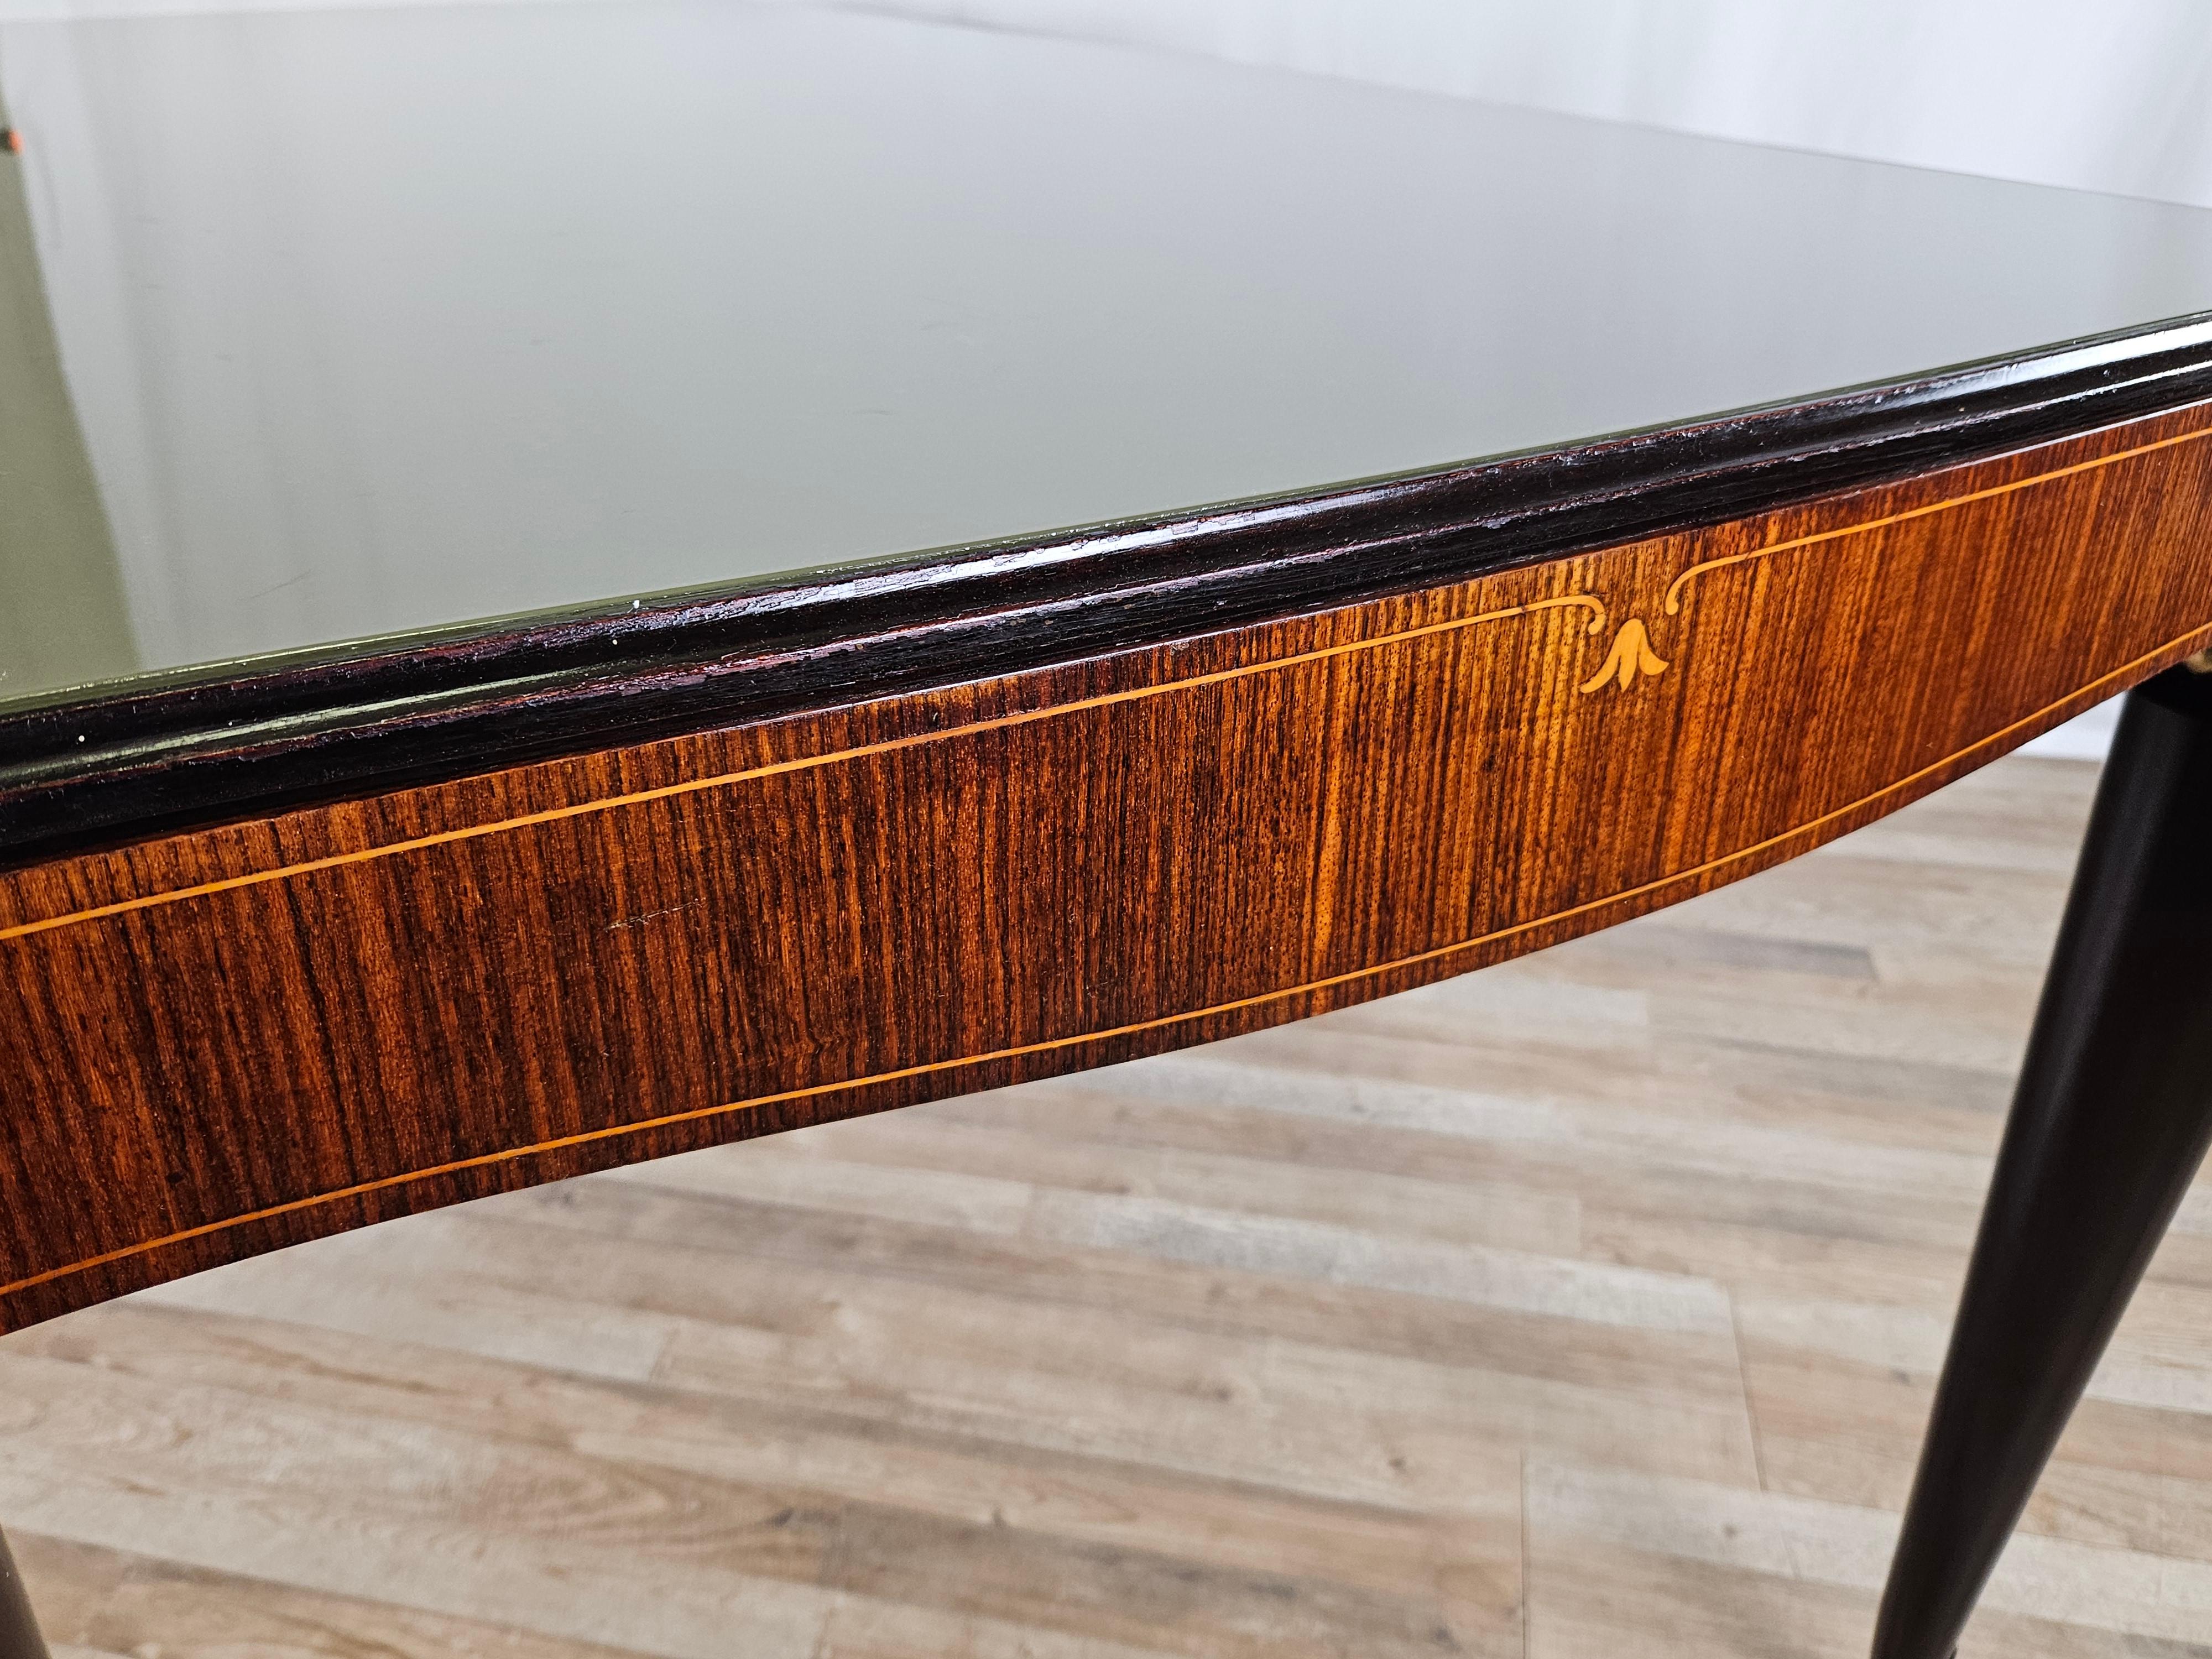 Elegant mid-20th-century mahogany dining table with ebonized profile and legs and brass end covers.

The table features a distinctive glass top with a shaped edge and contrasting shade to the frame to create a beautiful effect match any kind of